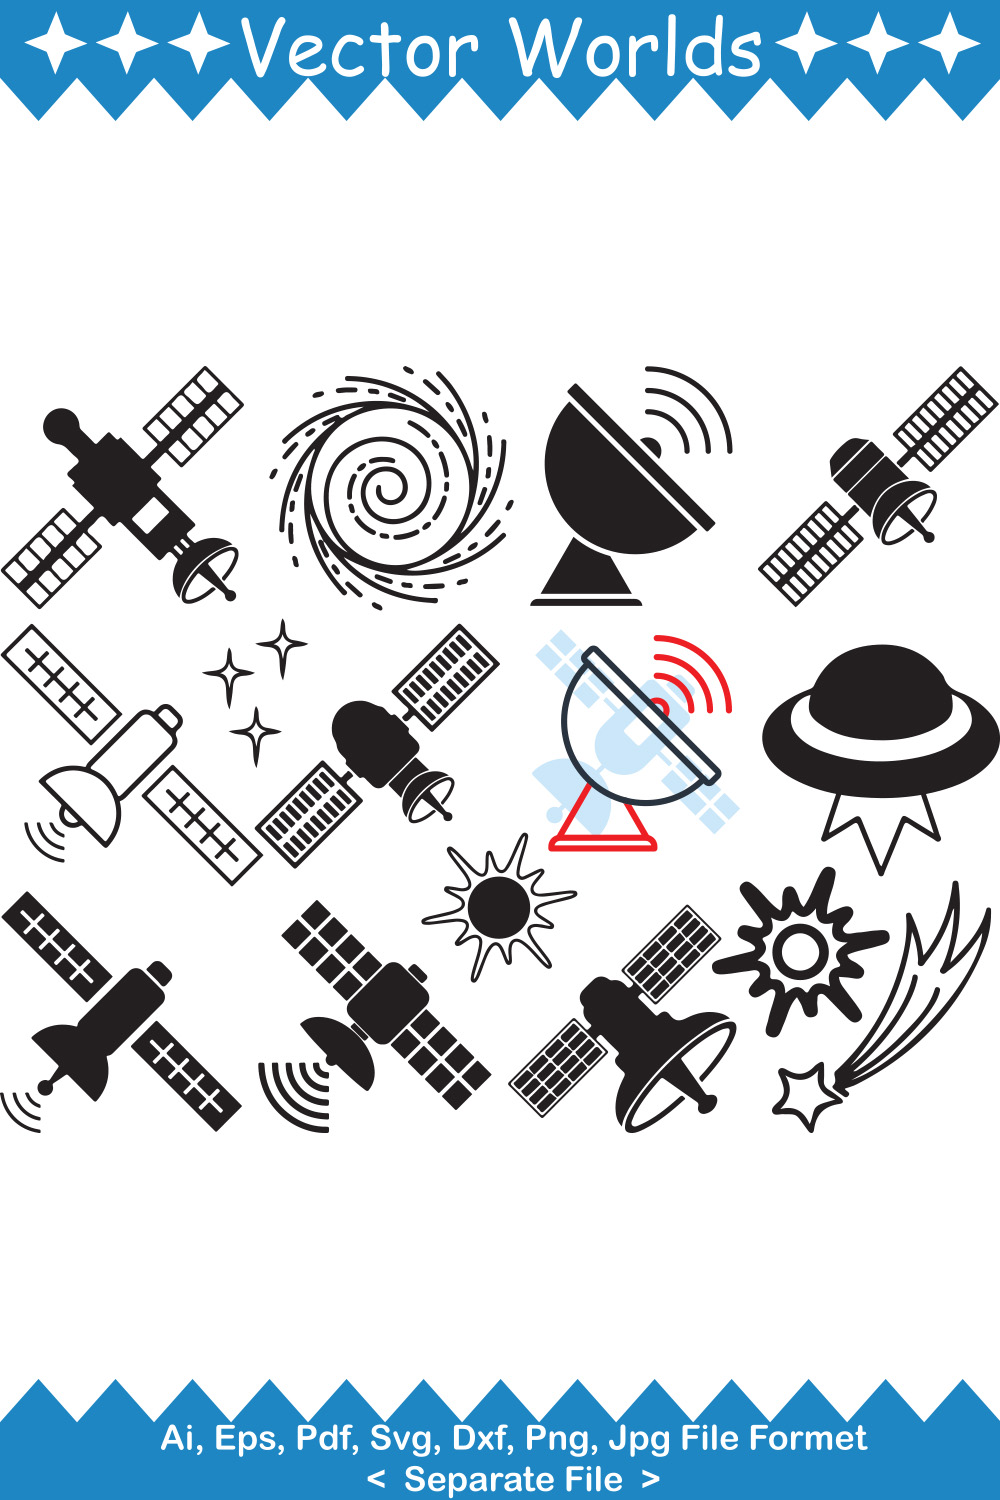 Bundle of vector adorable images of space satellite silhouettes.